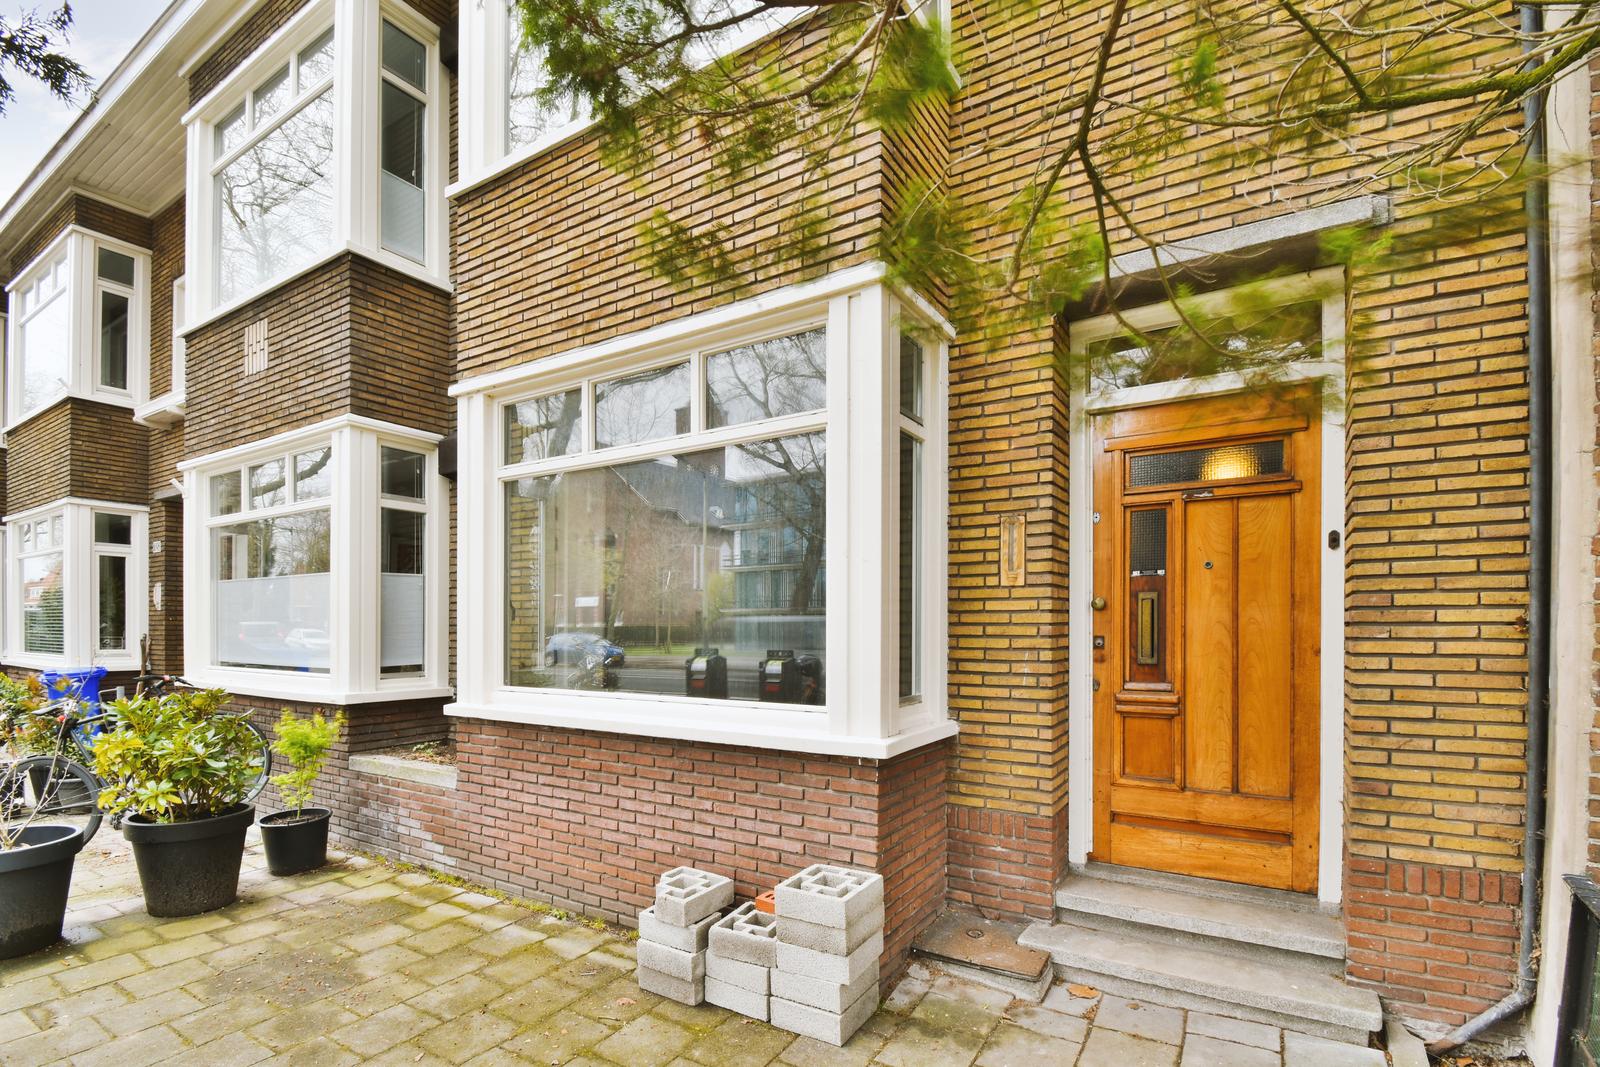 The front view of a brick building with signs, pavement and wooden doors lead to the apartment